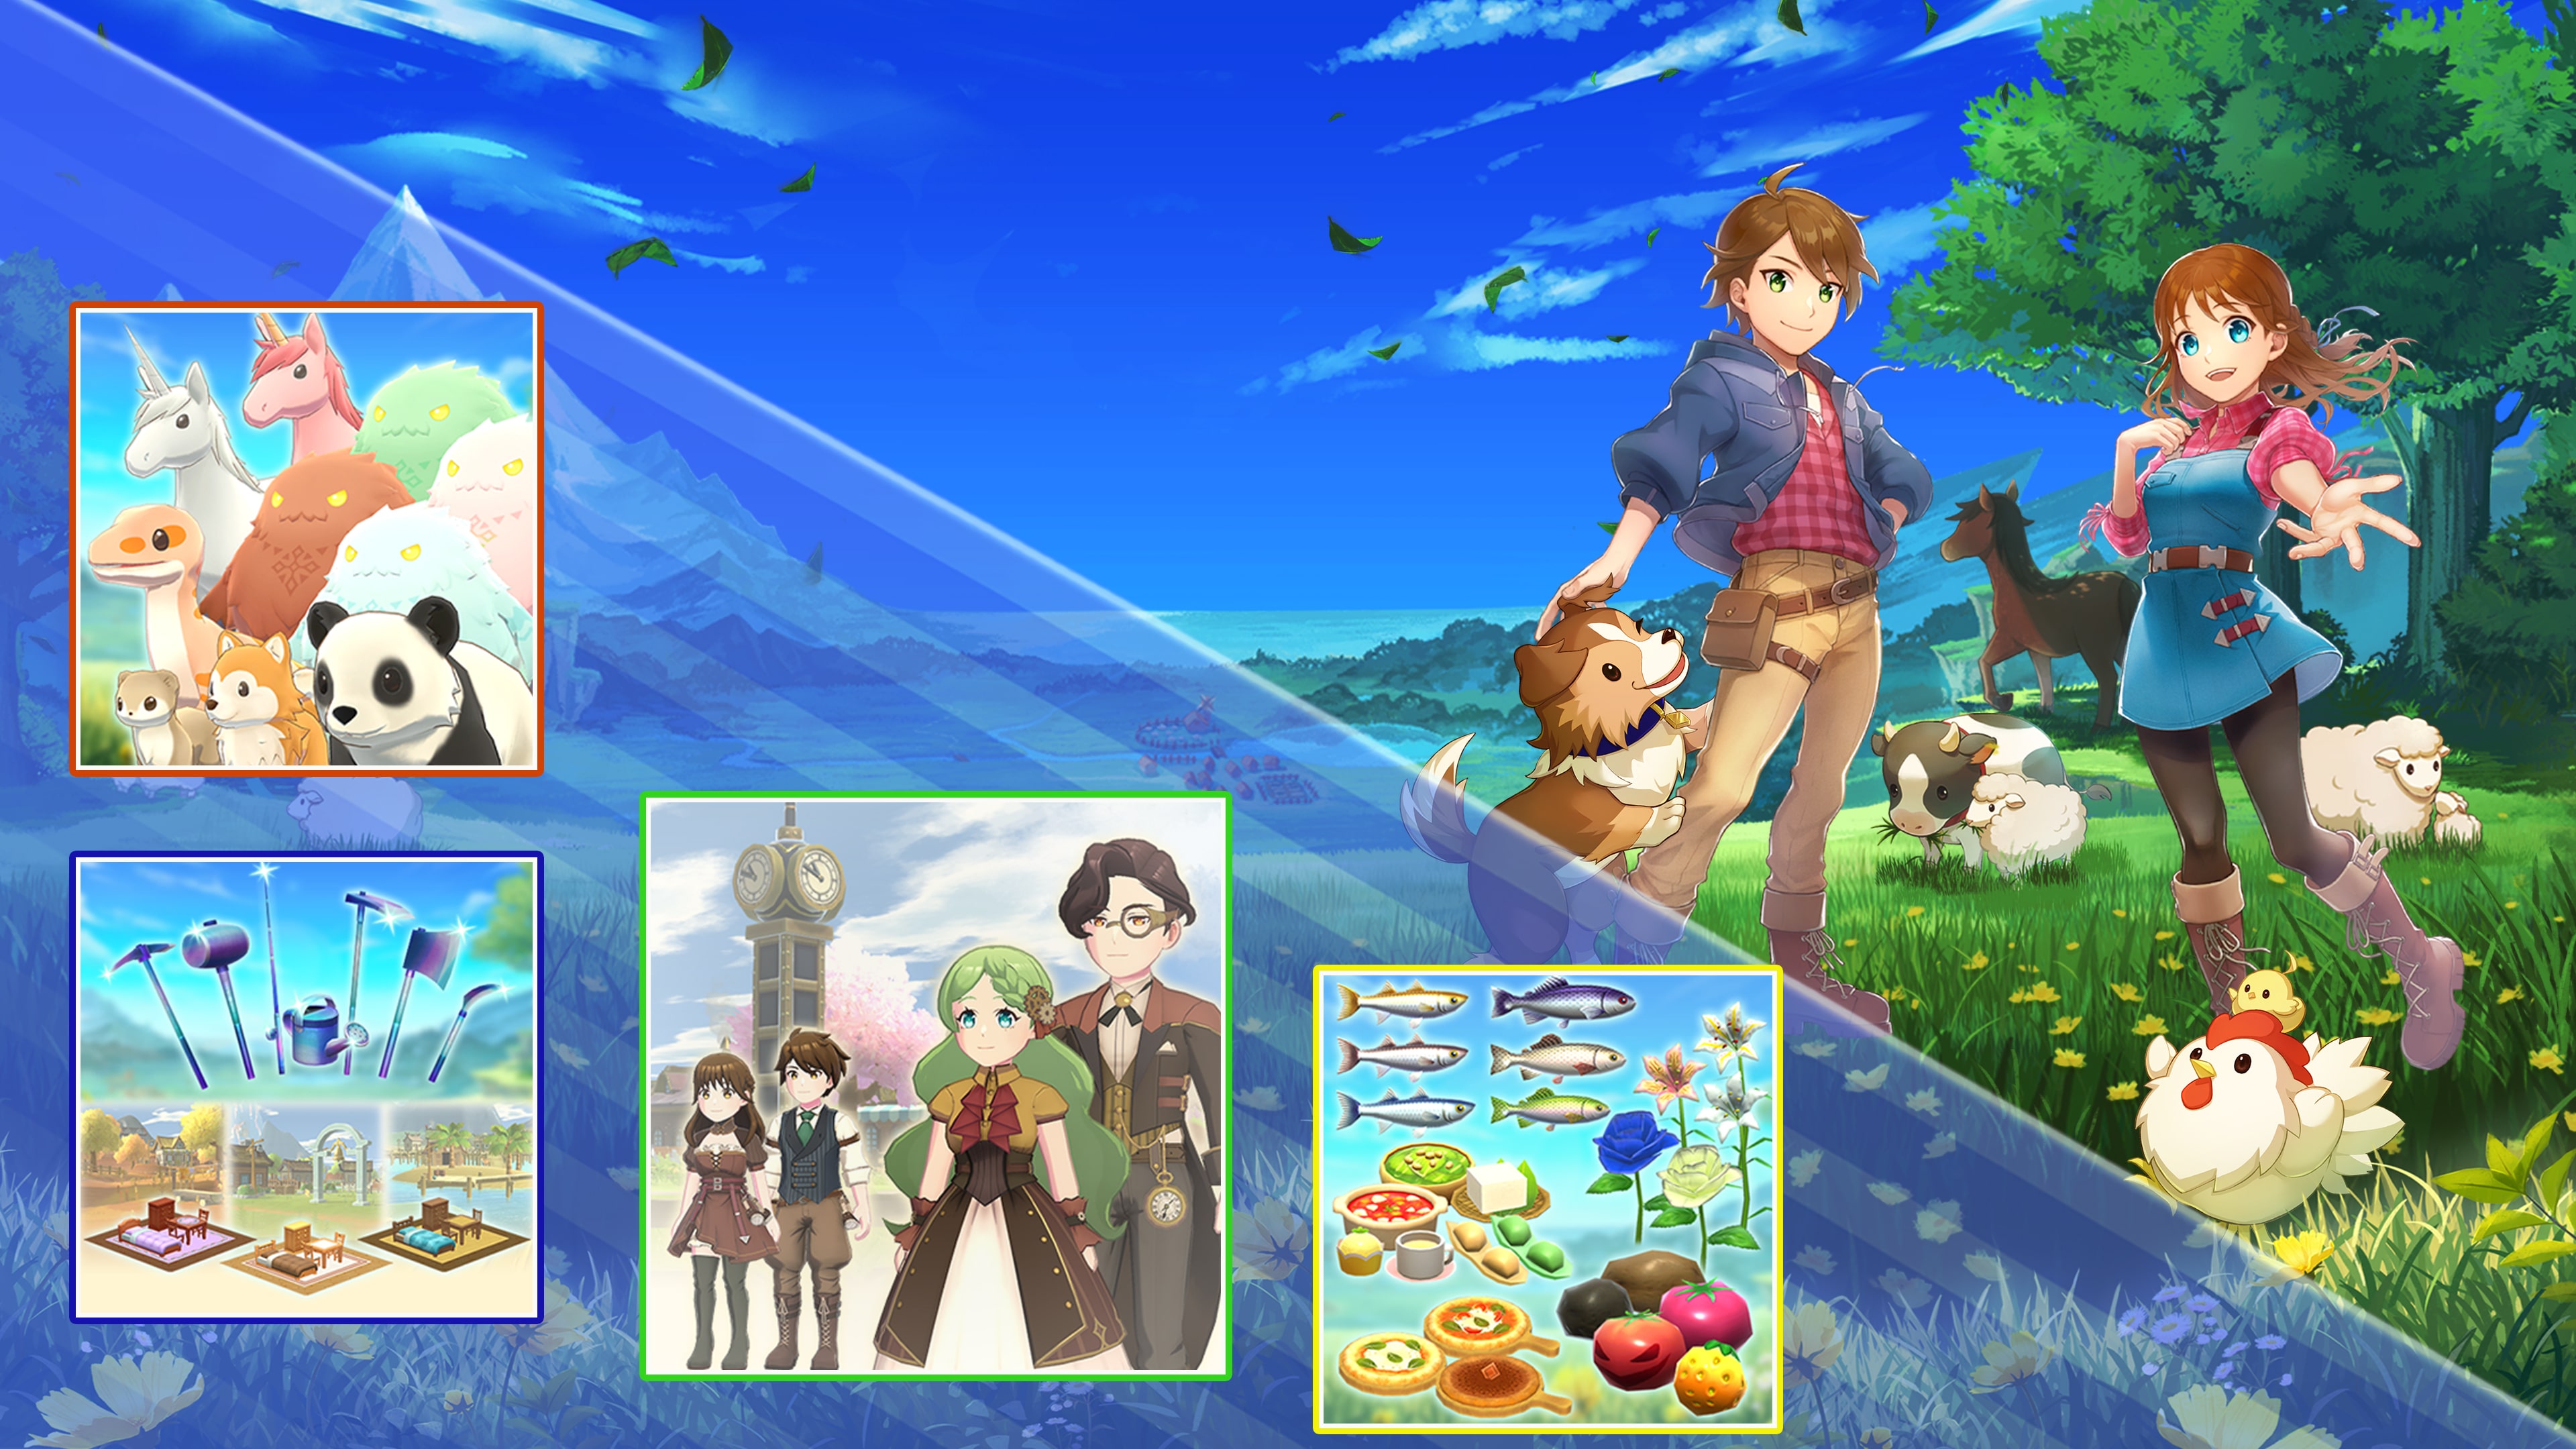 Lote de Harvest Moon: The Winds of Anthos